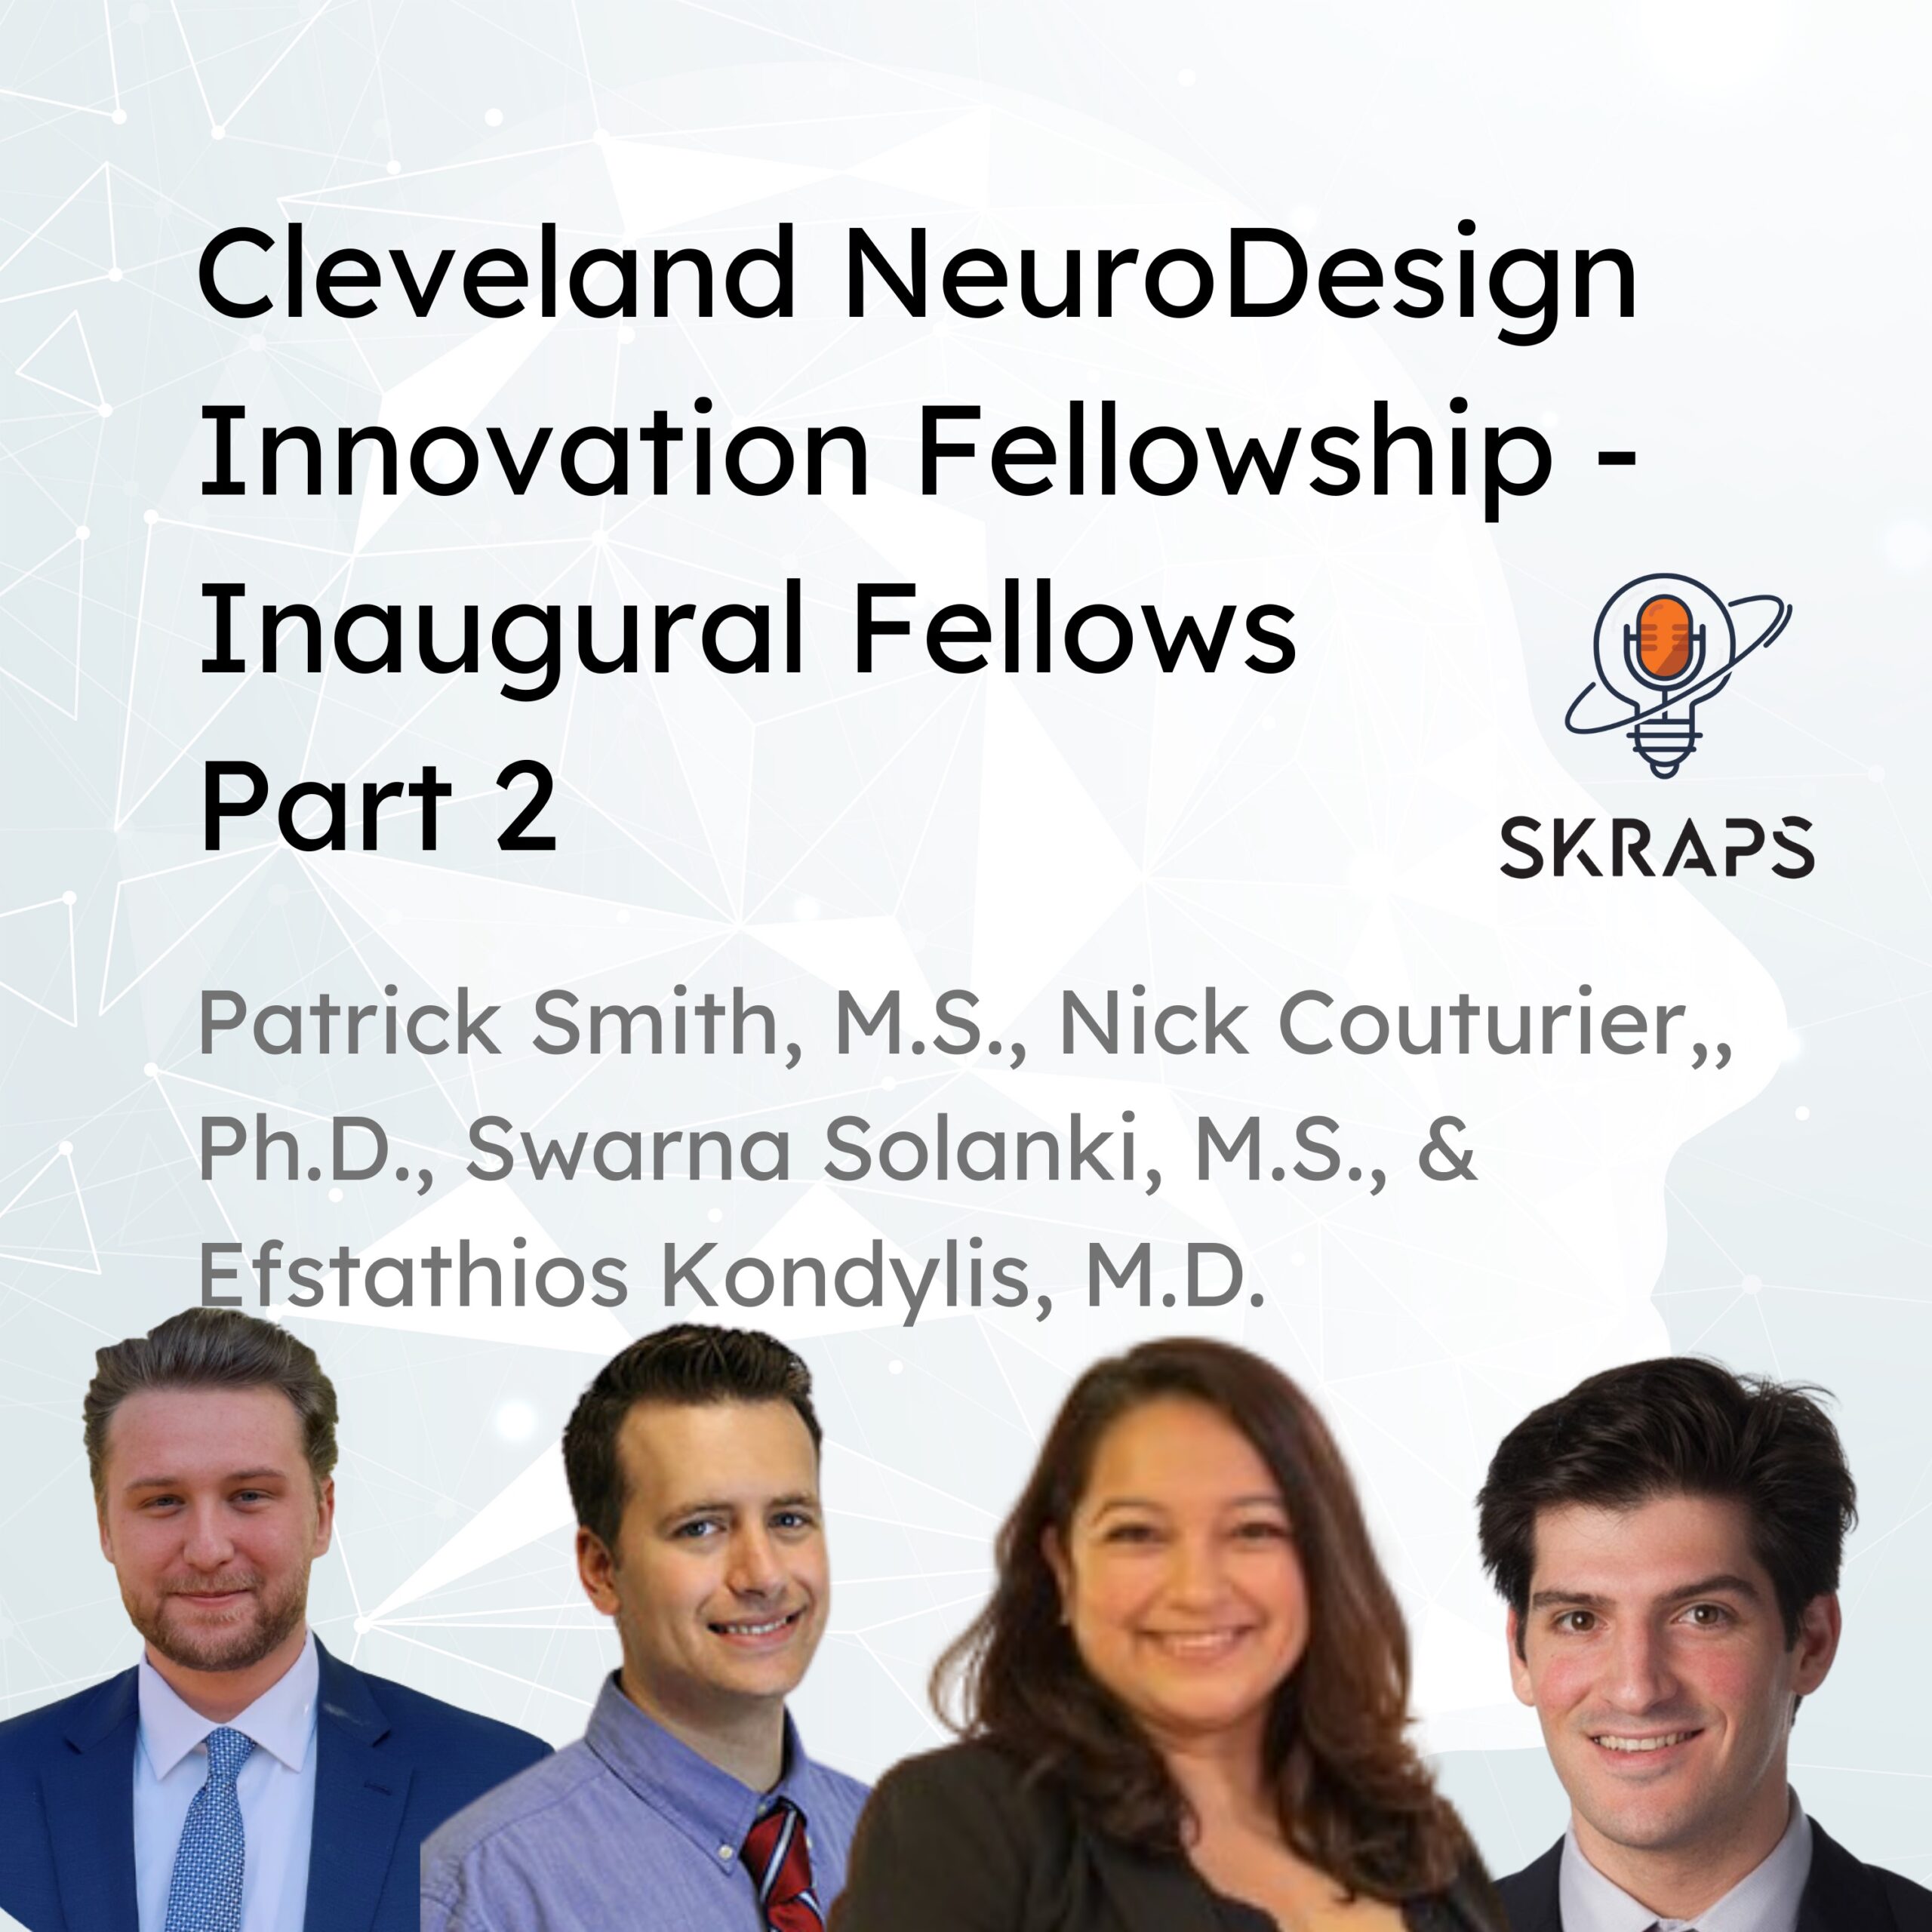 Part 2: Interview with the fellows of the Cleveland NeuroDesign Innovation Fellowship